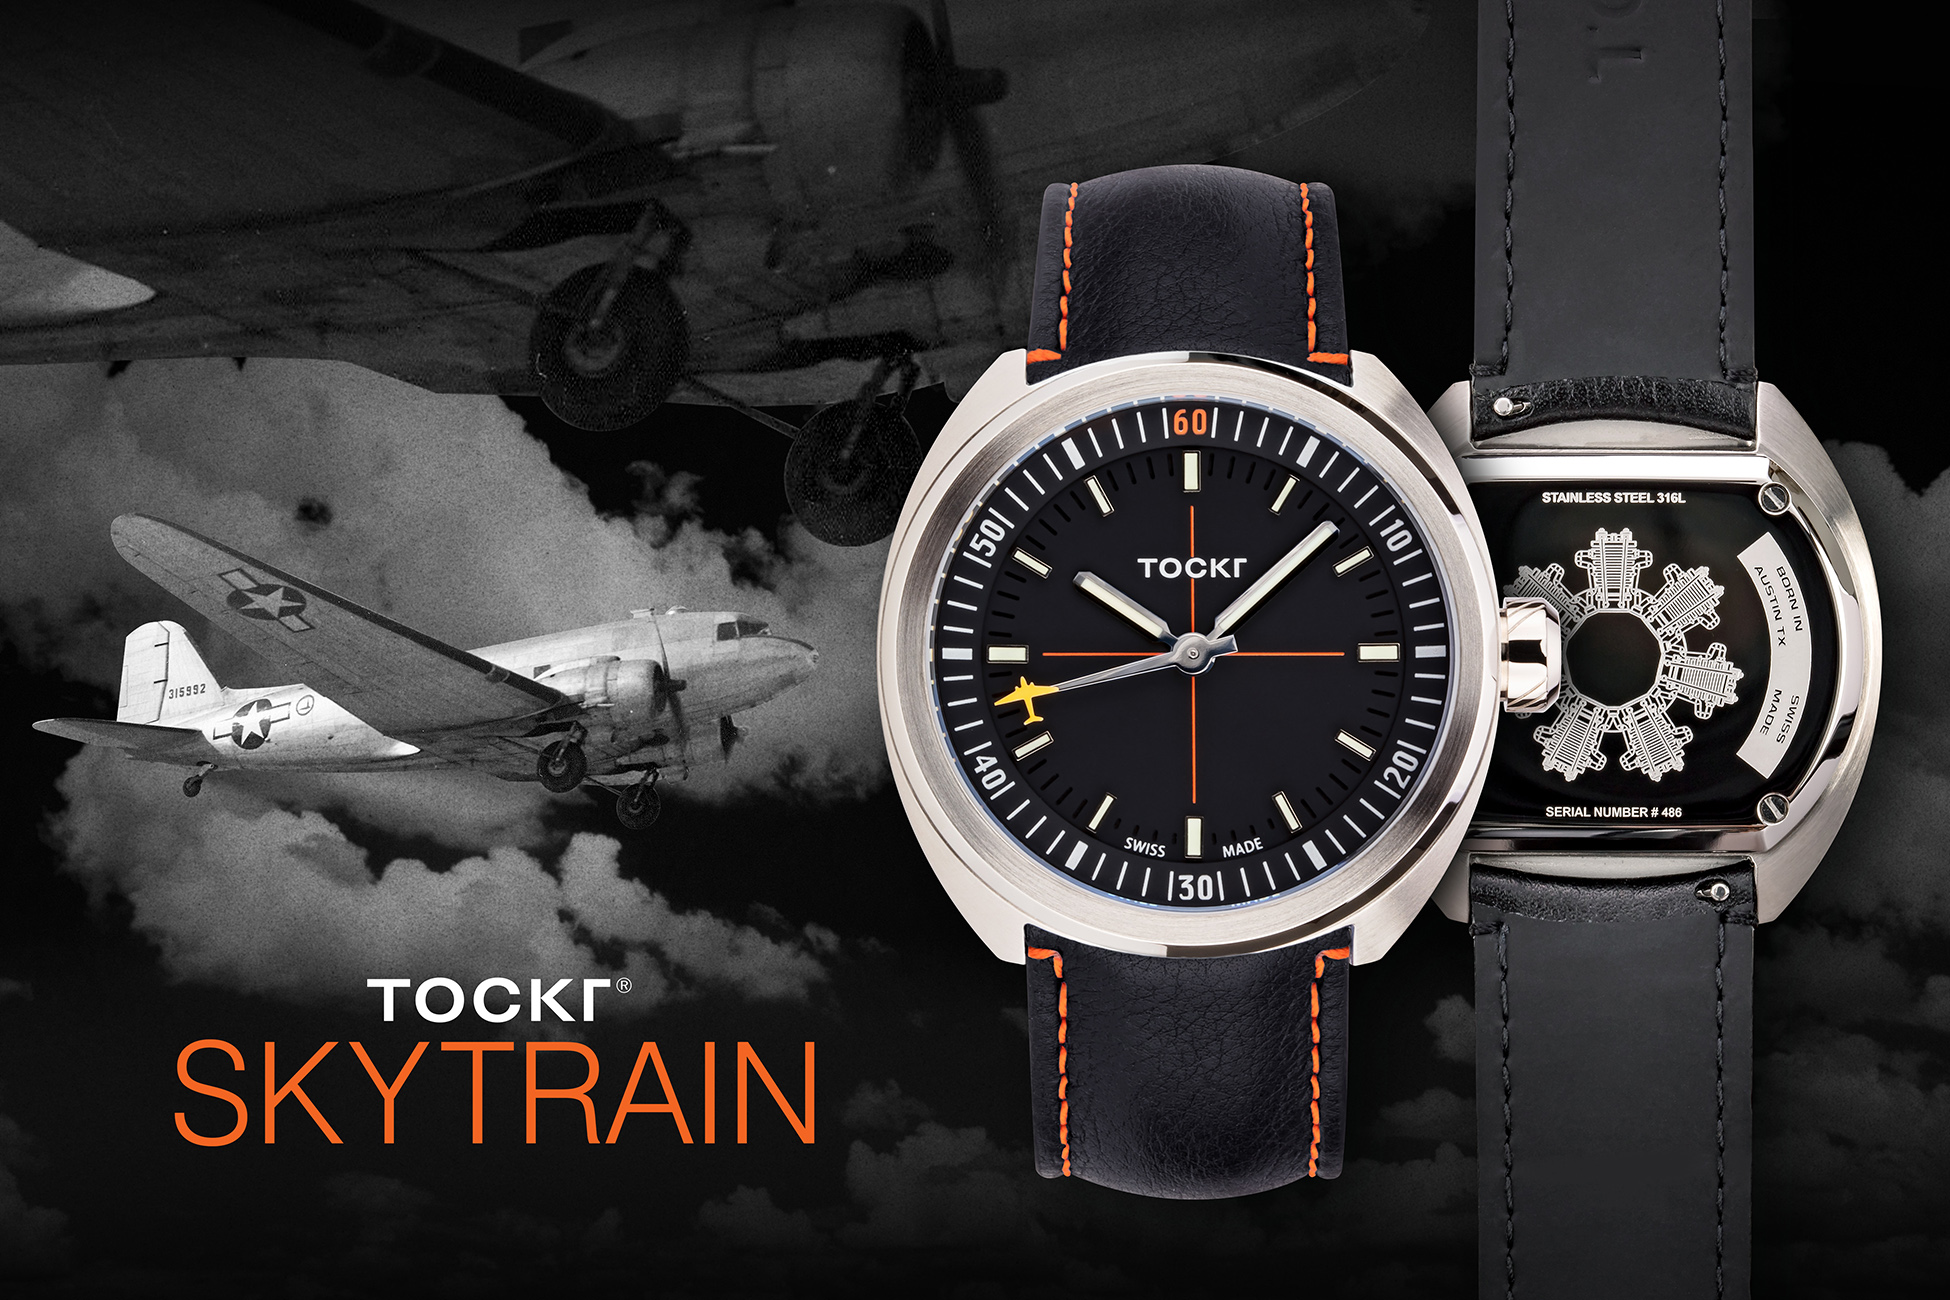 New Tockr Skytrain Watch Hands-On (And We Reveal The Giveaway Winner Who Named It)